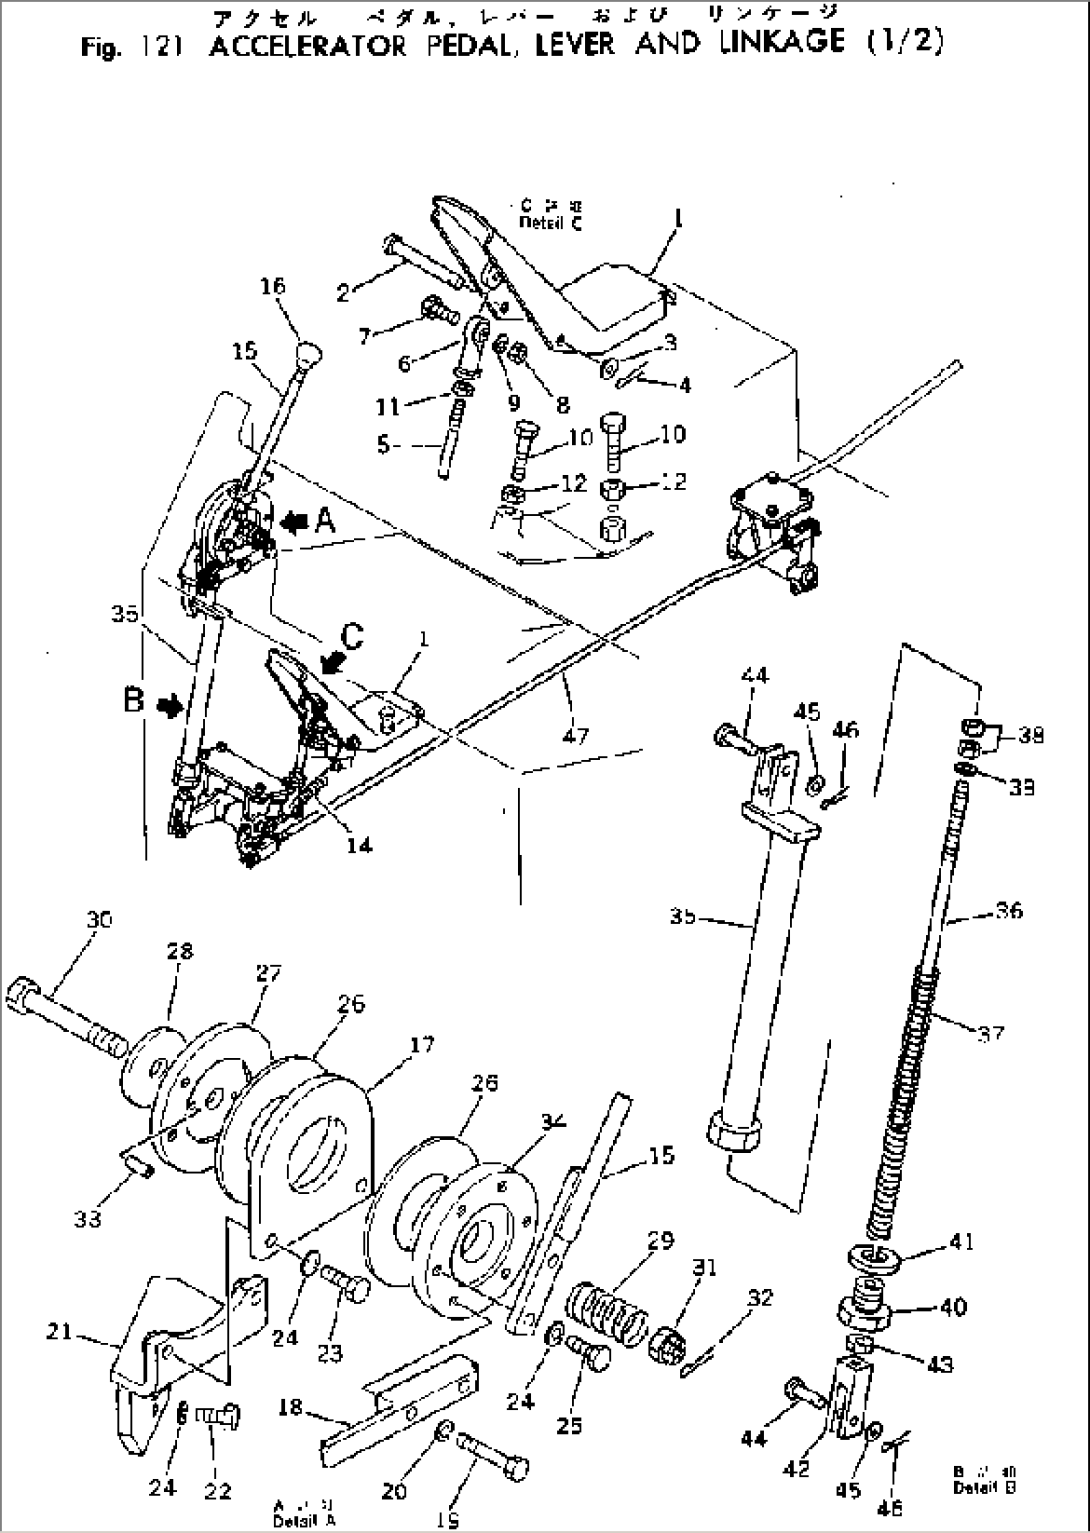 ACCELERATOR PEDAL¤ LEVER AND LINKAGE (1/2)